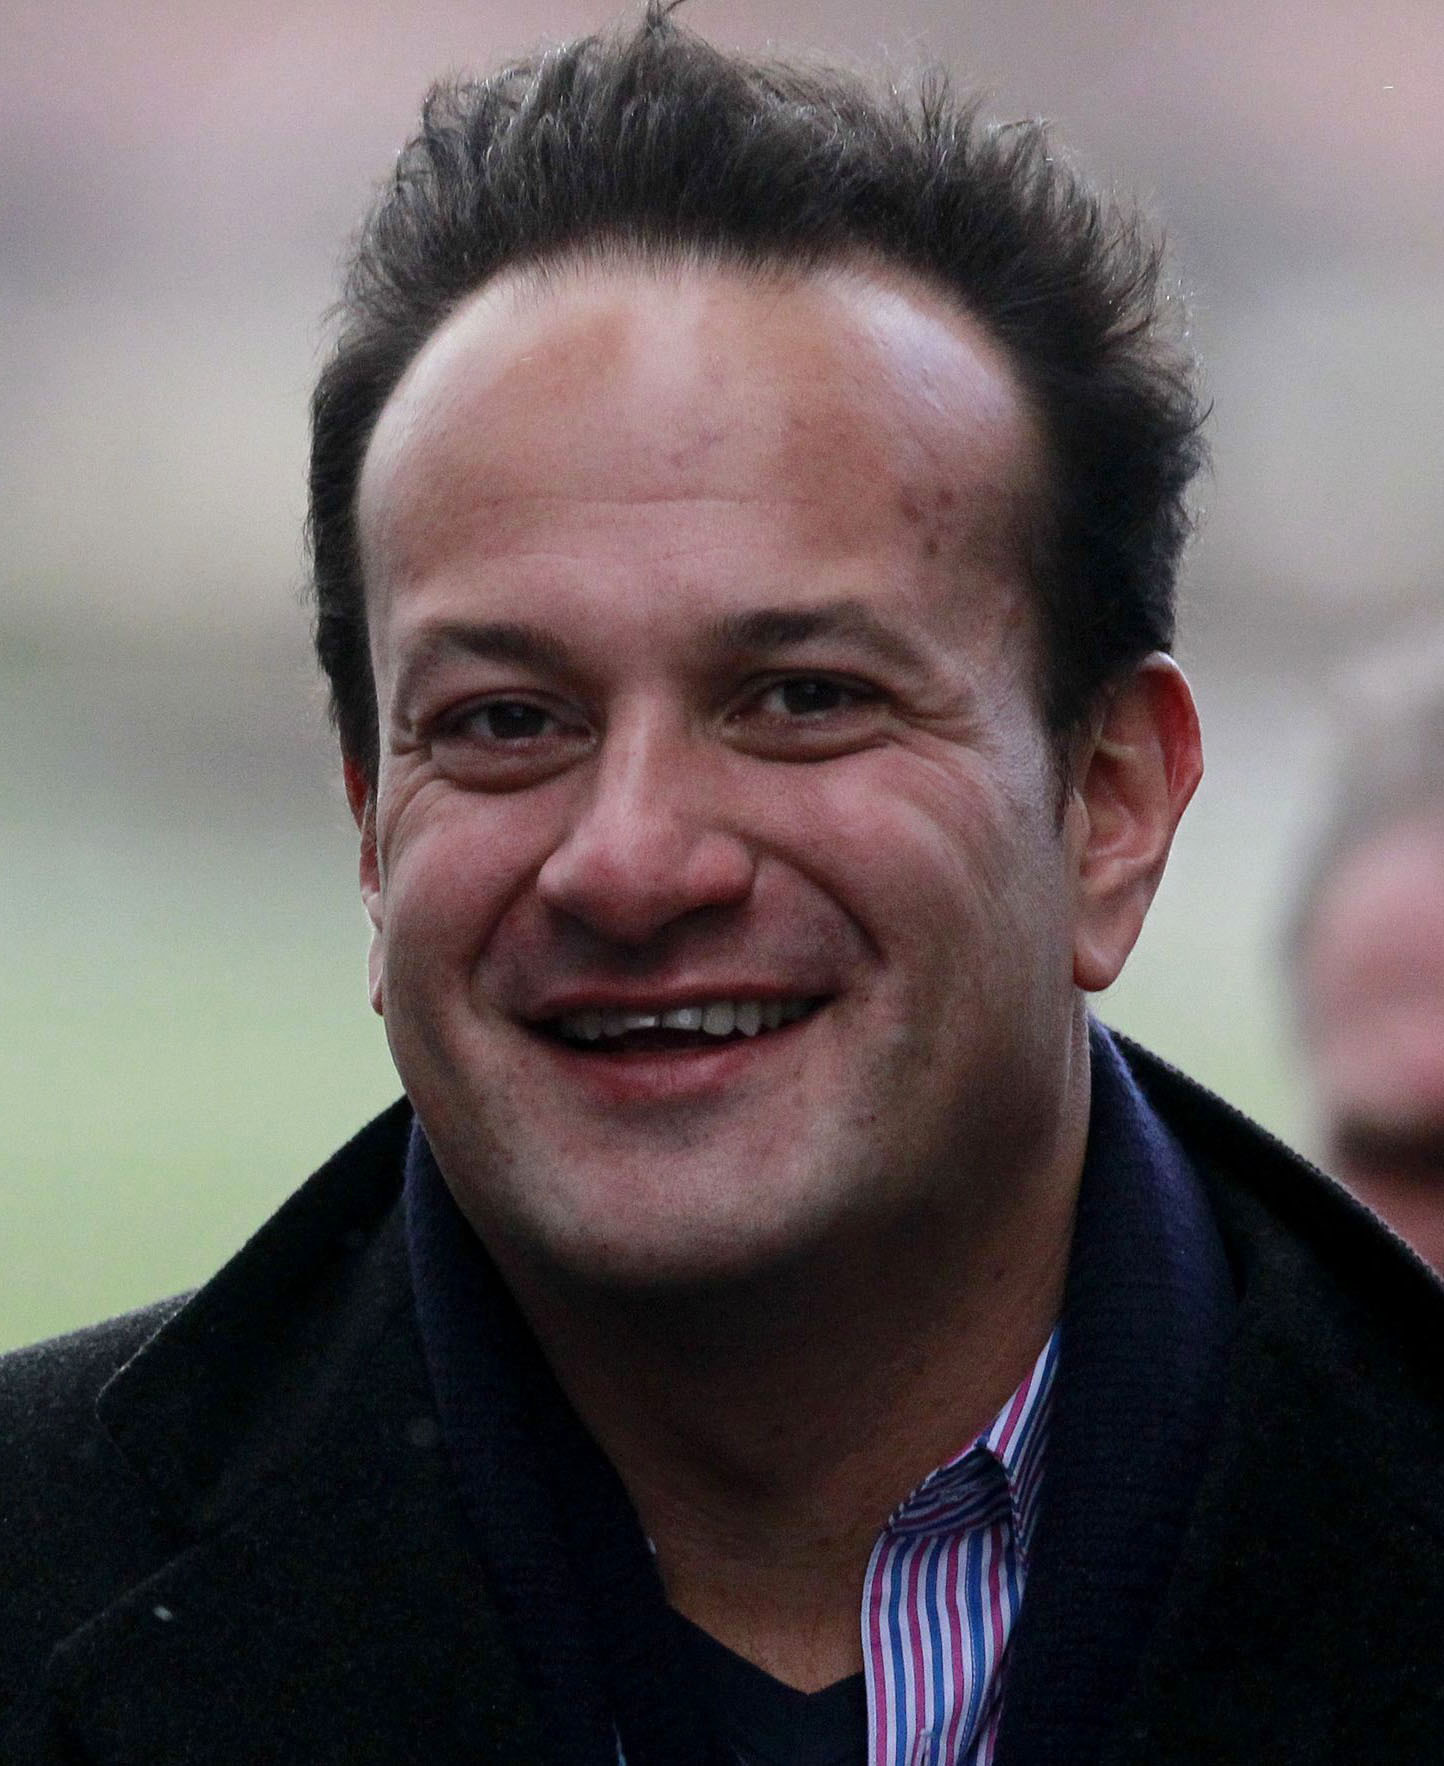 Irish Health minister Leo Varadkar, 36, who has publicly come out as gay, pictured here on Dec. 27, 2013. (Brian Lawless—Press Association/AP)